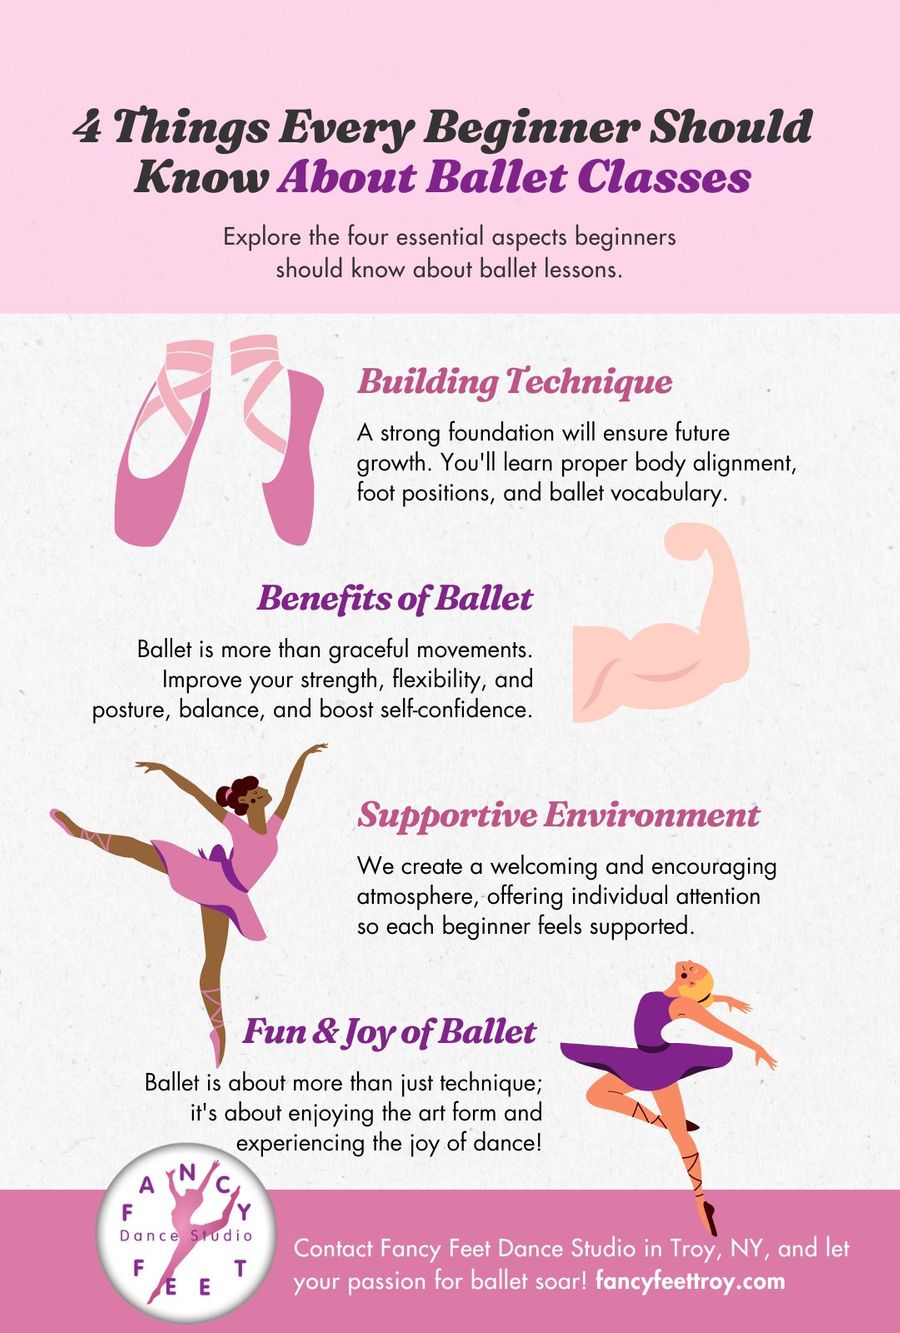 M39013 - Infographic - 4 Things Every Beginner Should Know About Ballet Classes.jpg